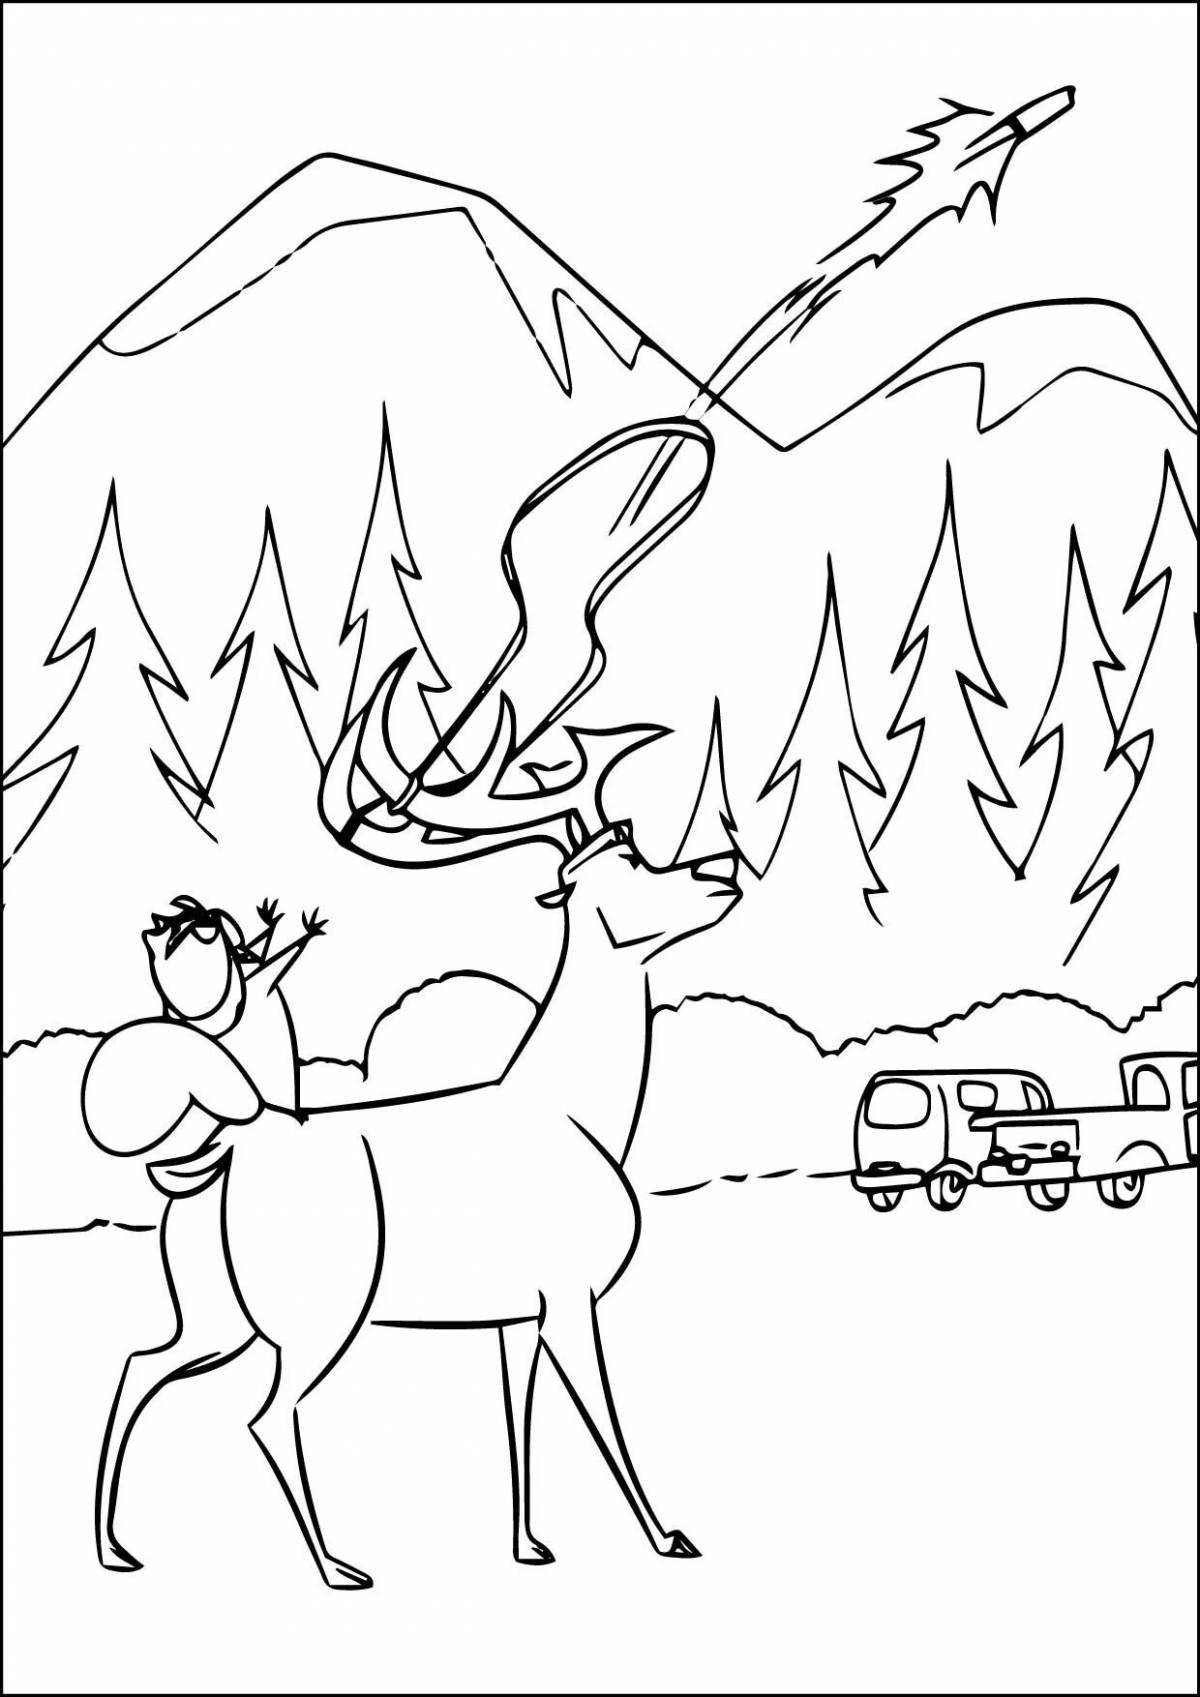 Glitter forest fire coloring page